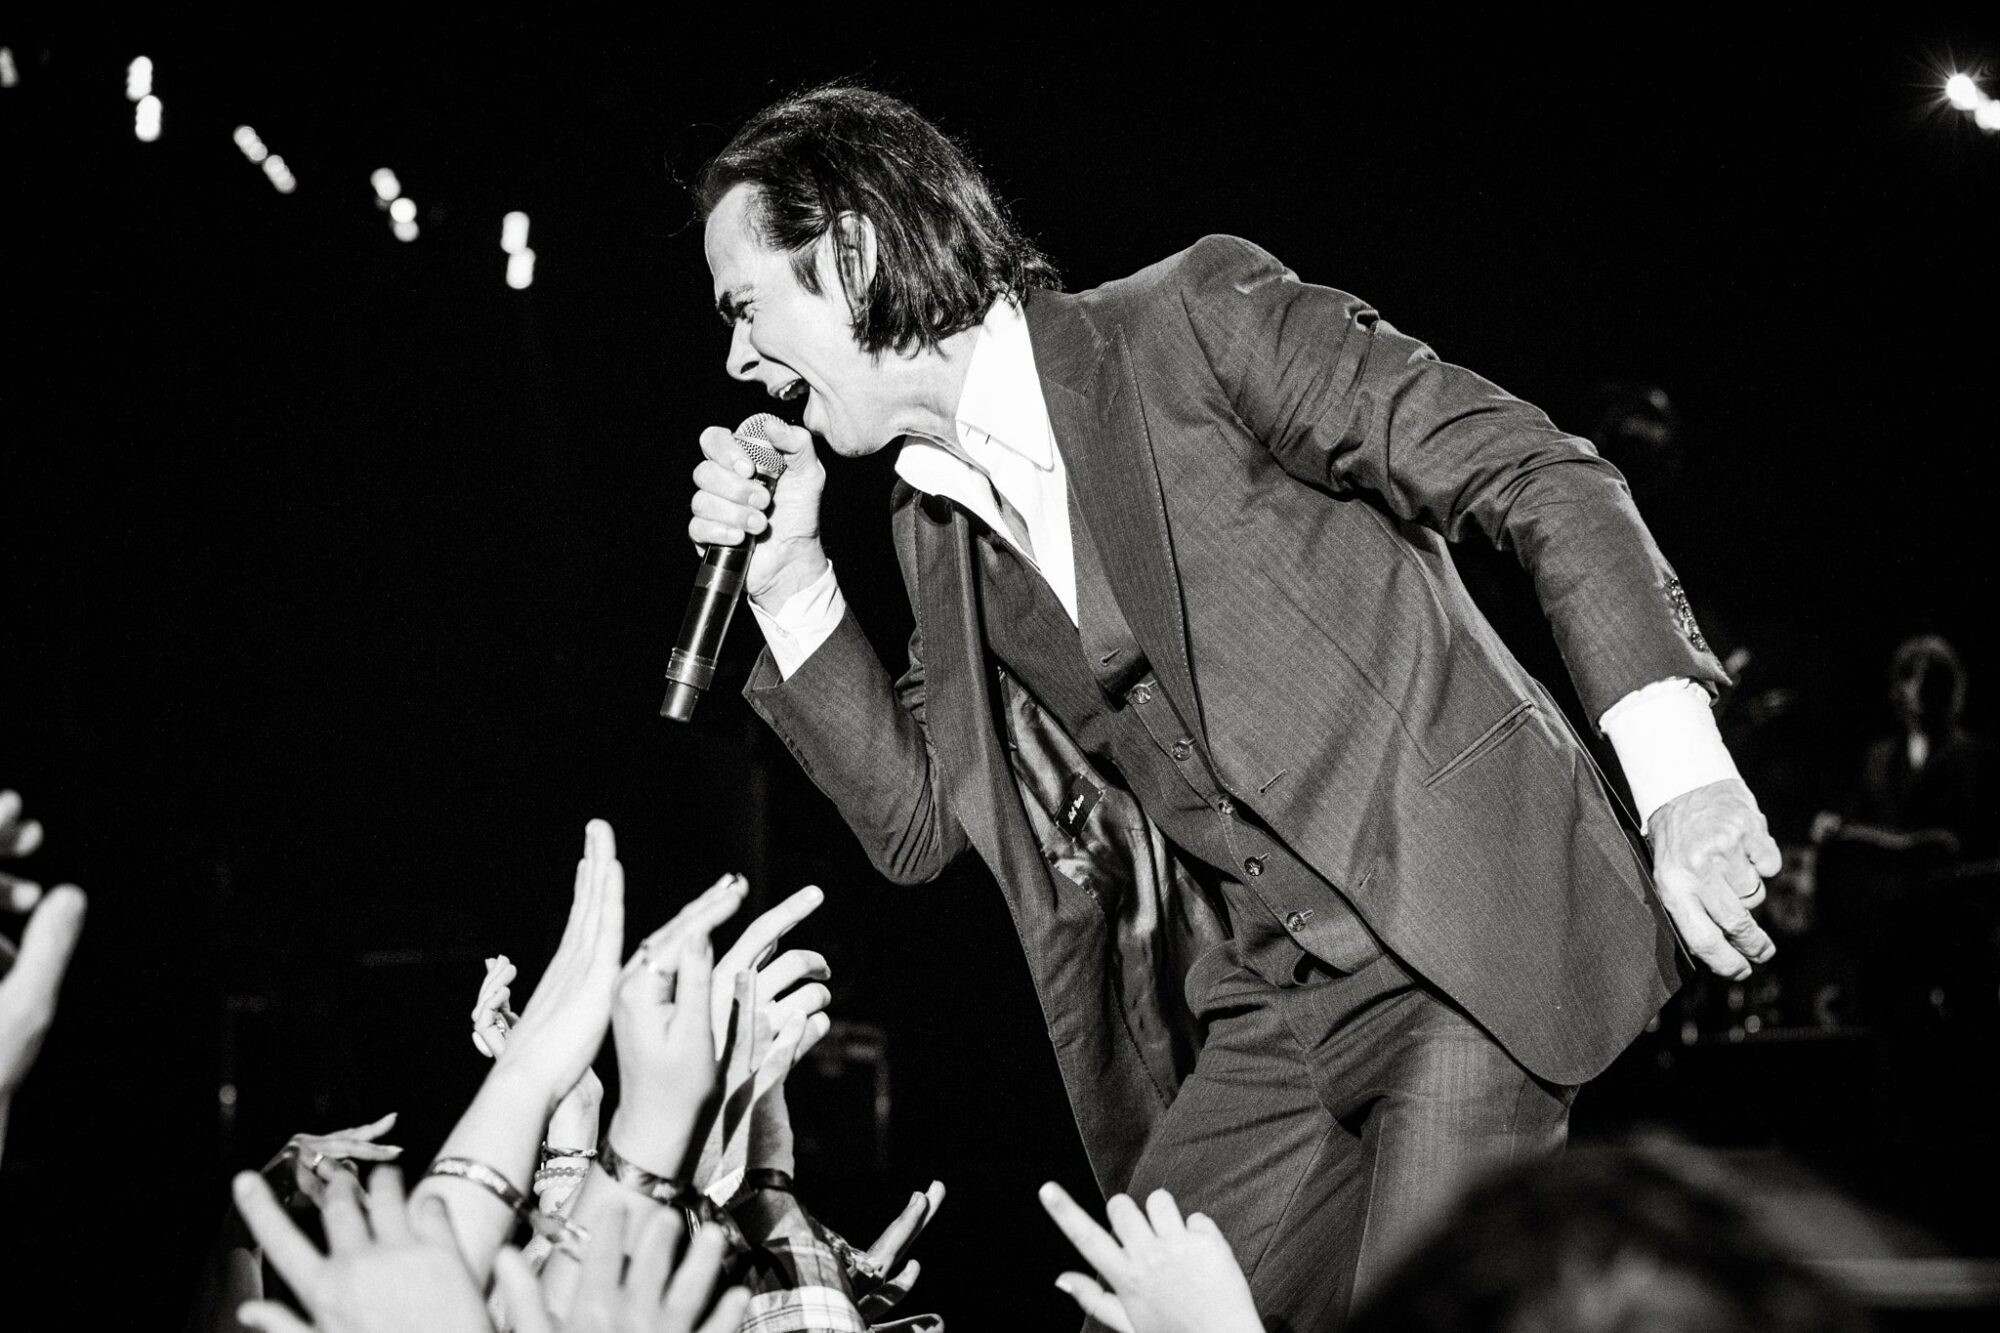 Image name Nick Cave Premium Package The Luxury Experience at First Direct Arena Leeds the 1 image from the post Nick Cave - Premium Package - the Gallery at First Direct Arena, Leeds in Yorkshire.com.